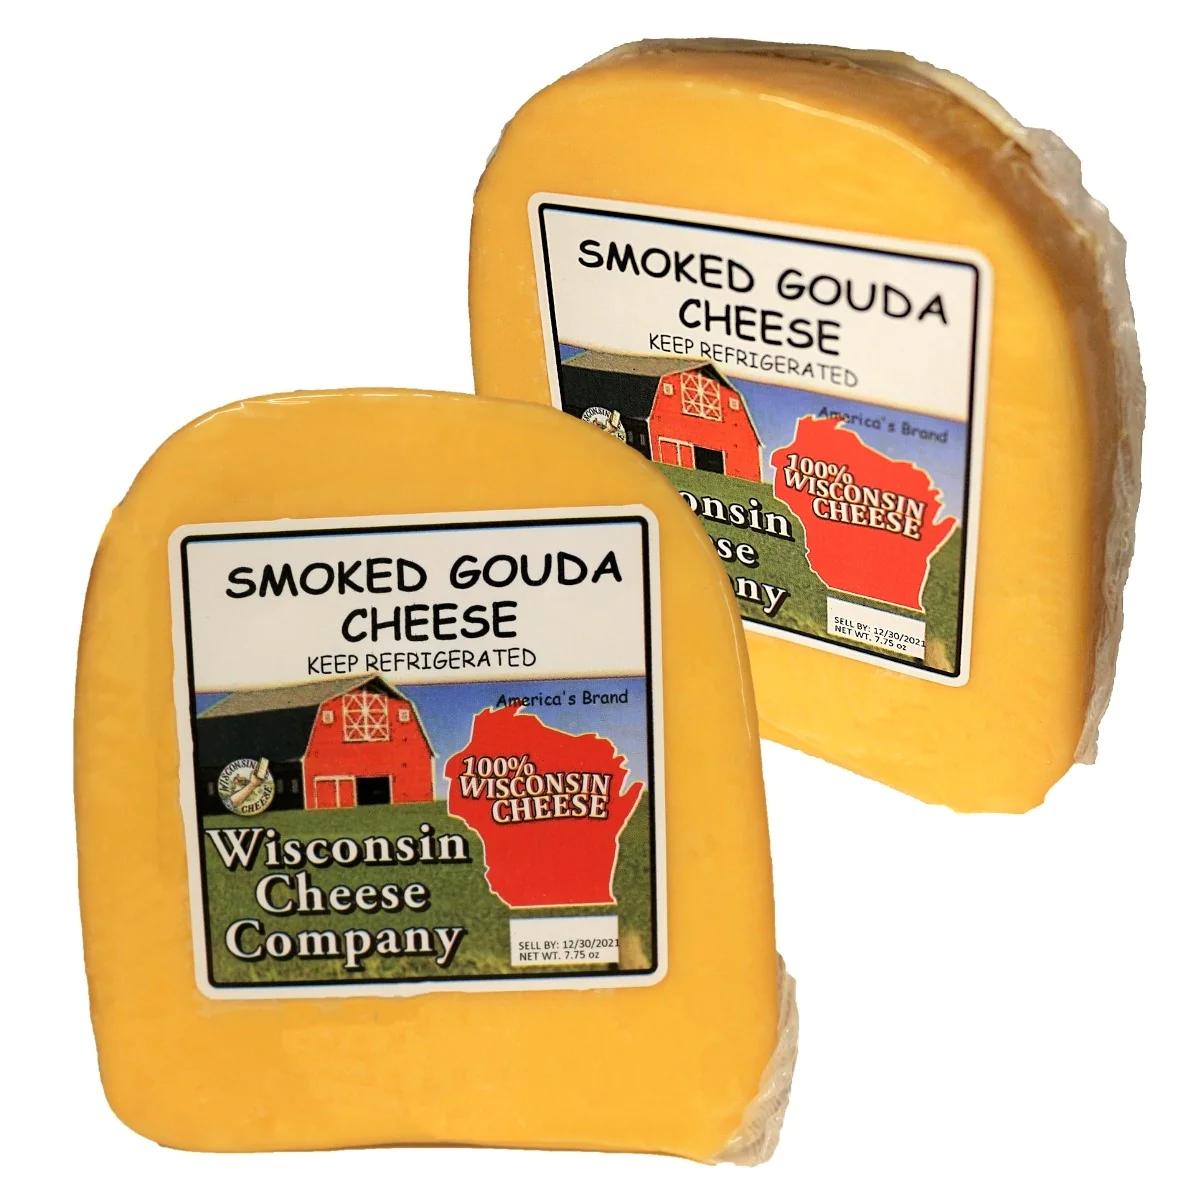 costco smoked cheese - Does Costco sell Swiss cheese